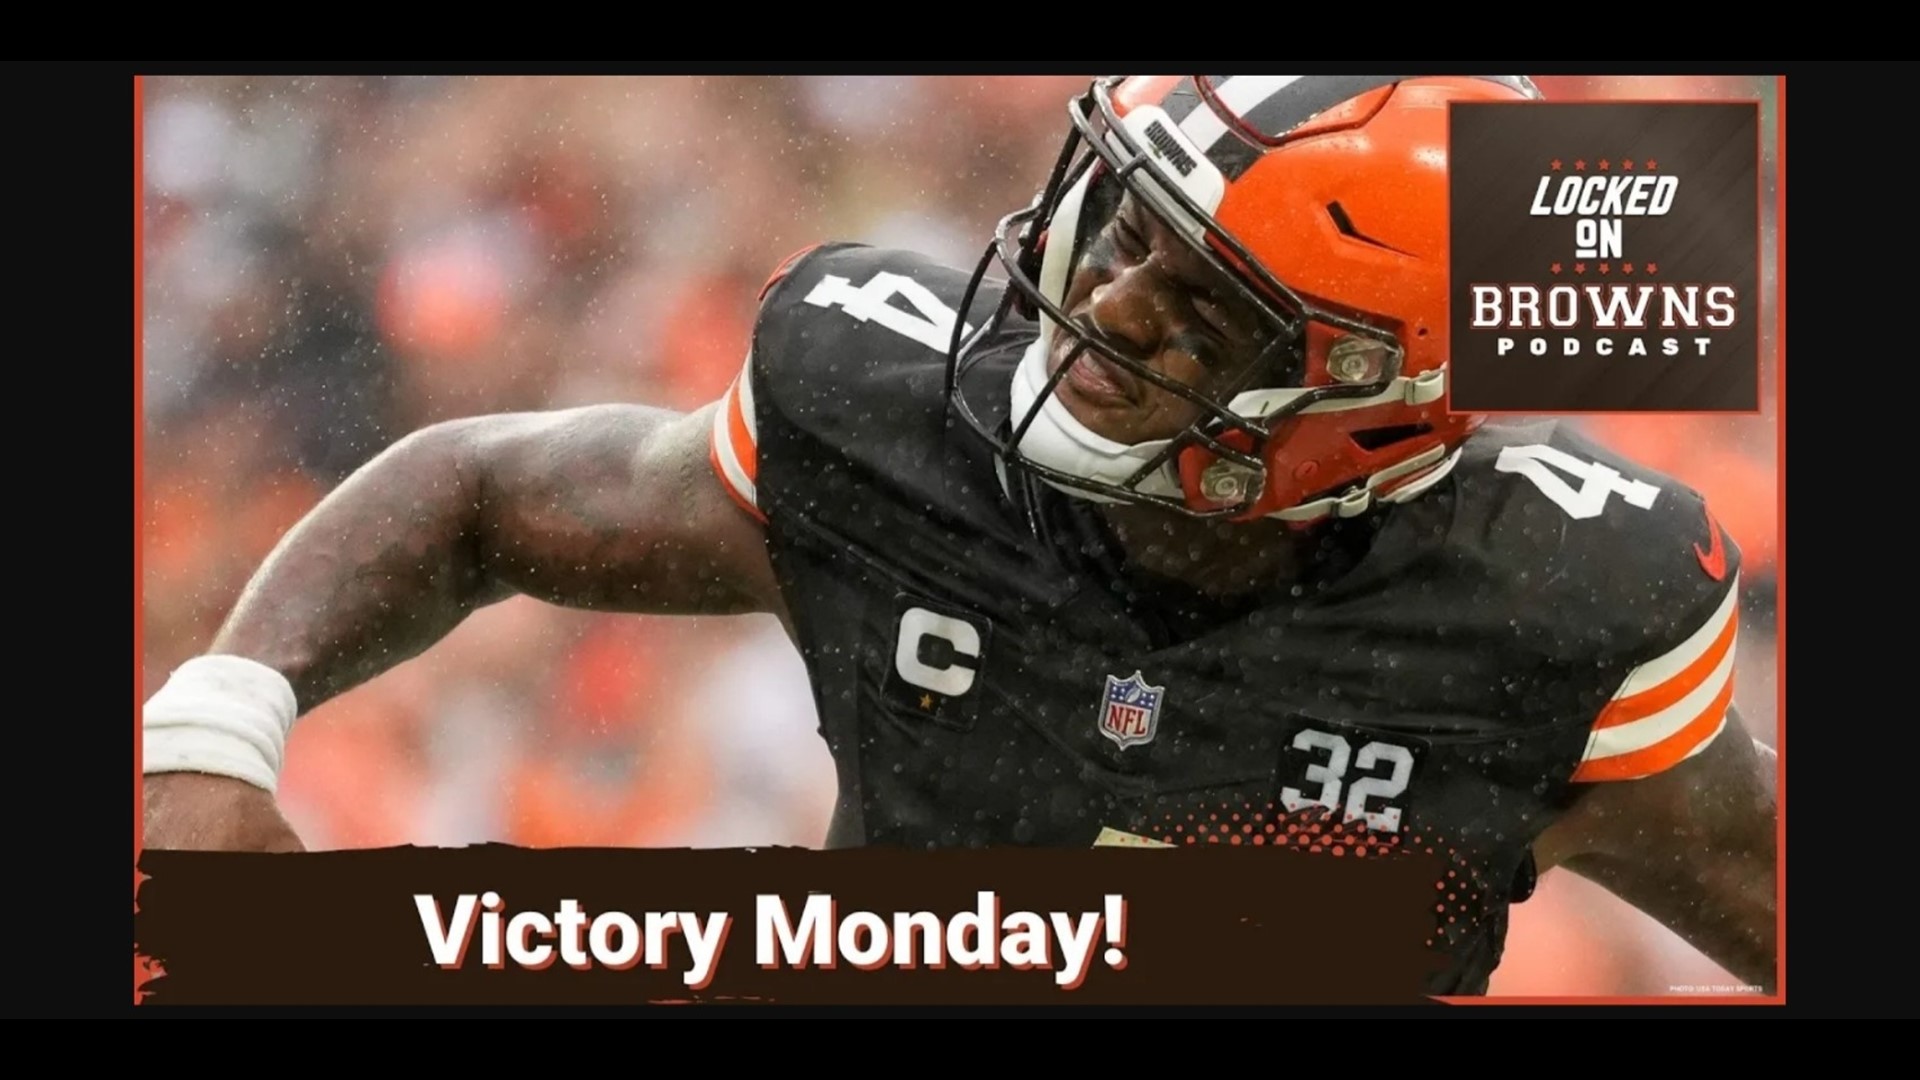 The Cleveland Browns make a week one statement by beating the Cincinnati Bengals convincingly at home 24-3.